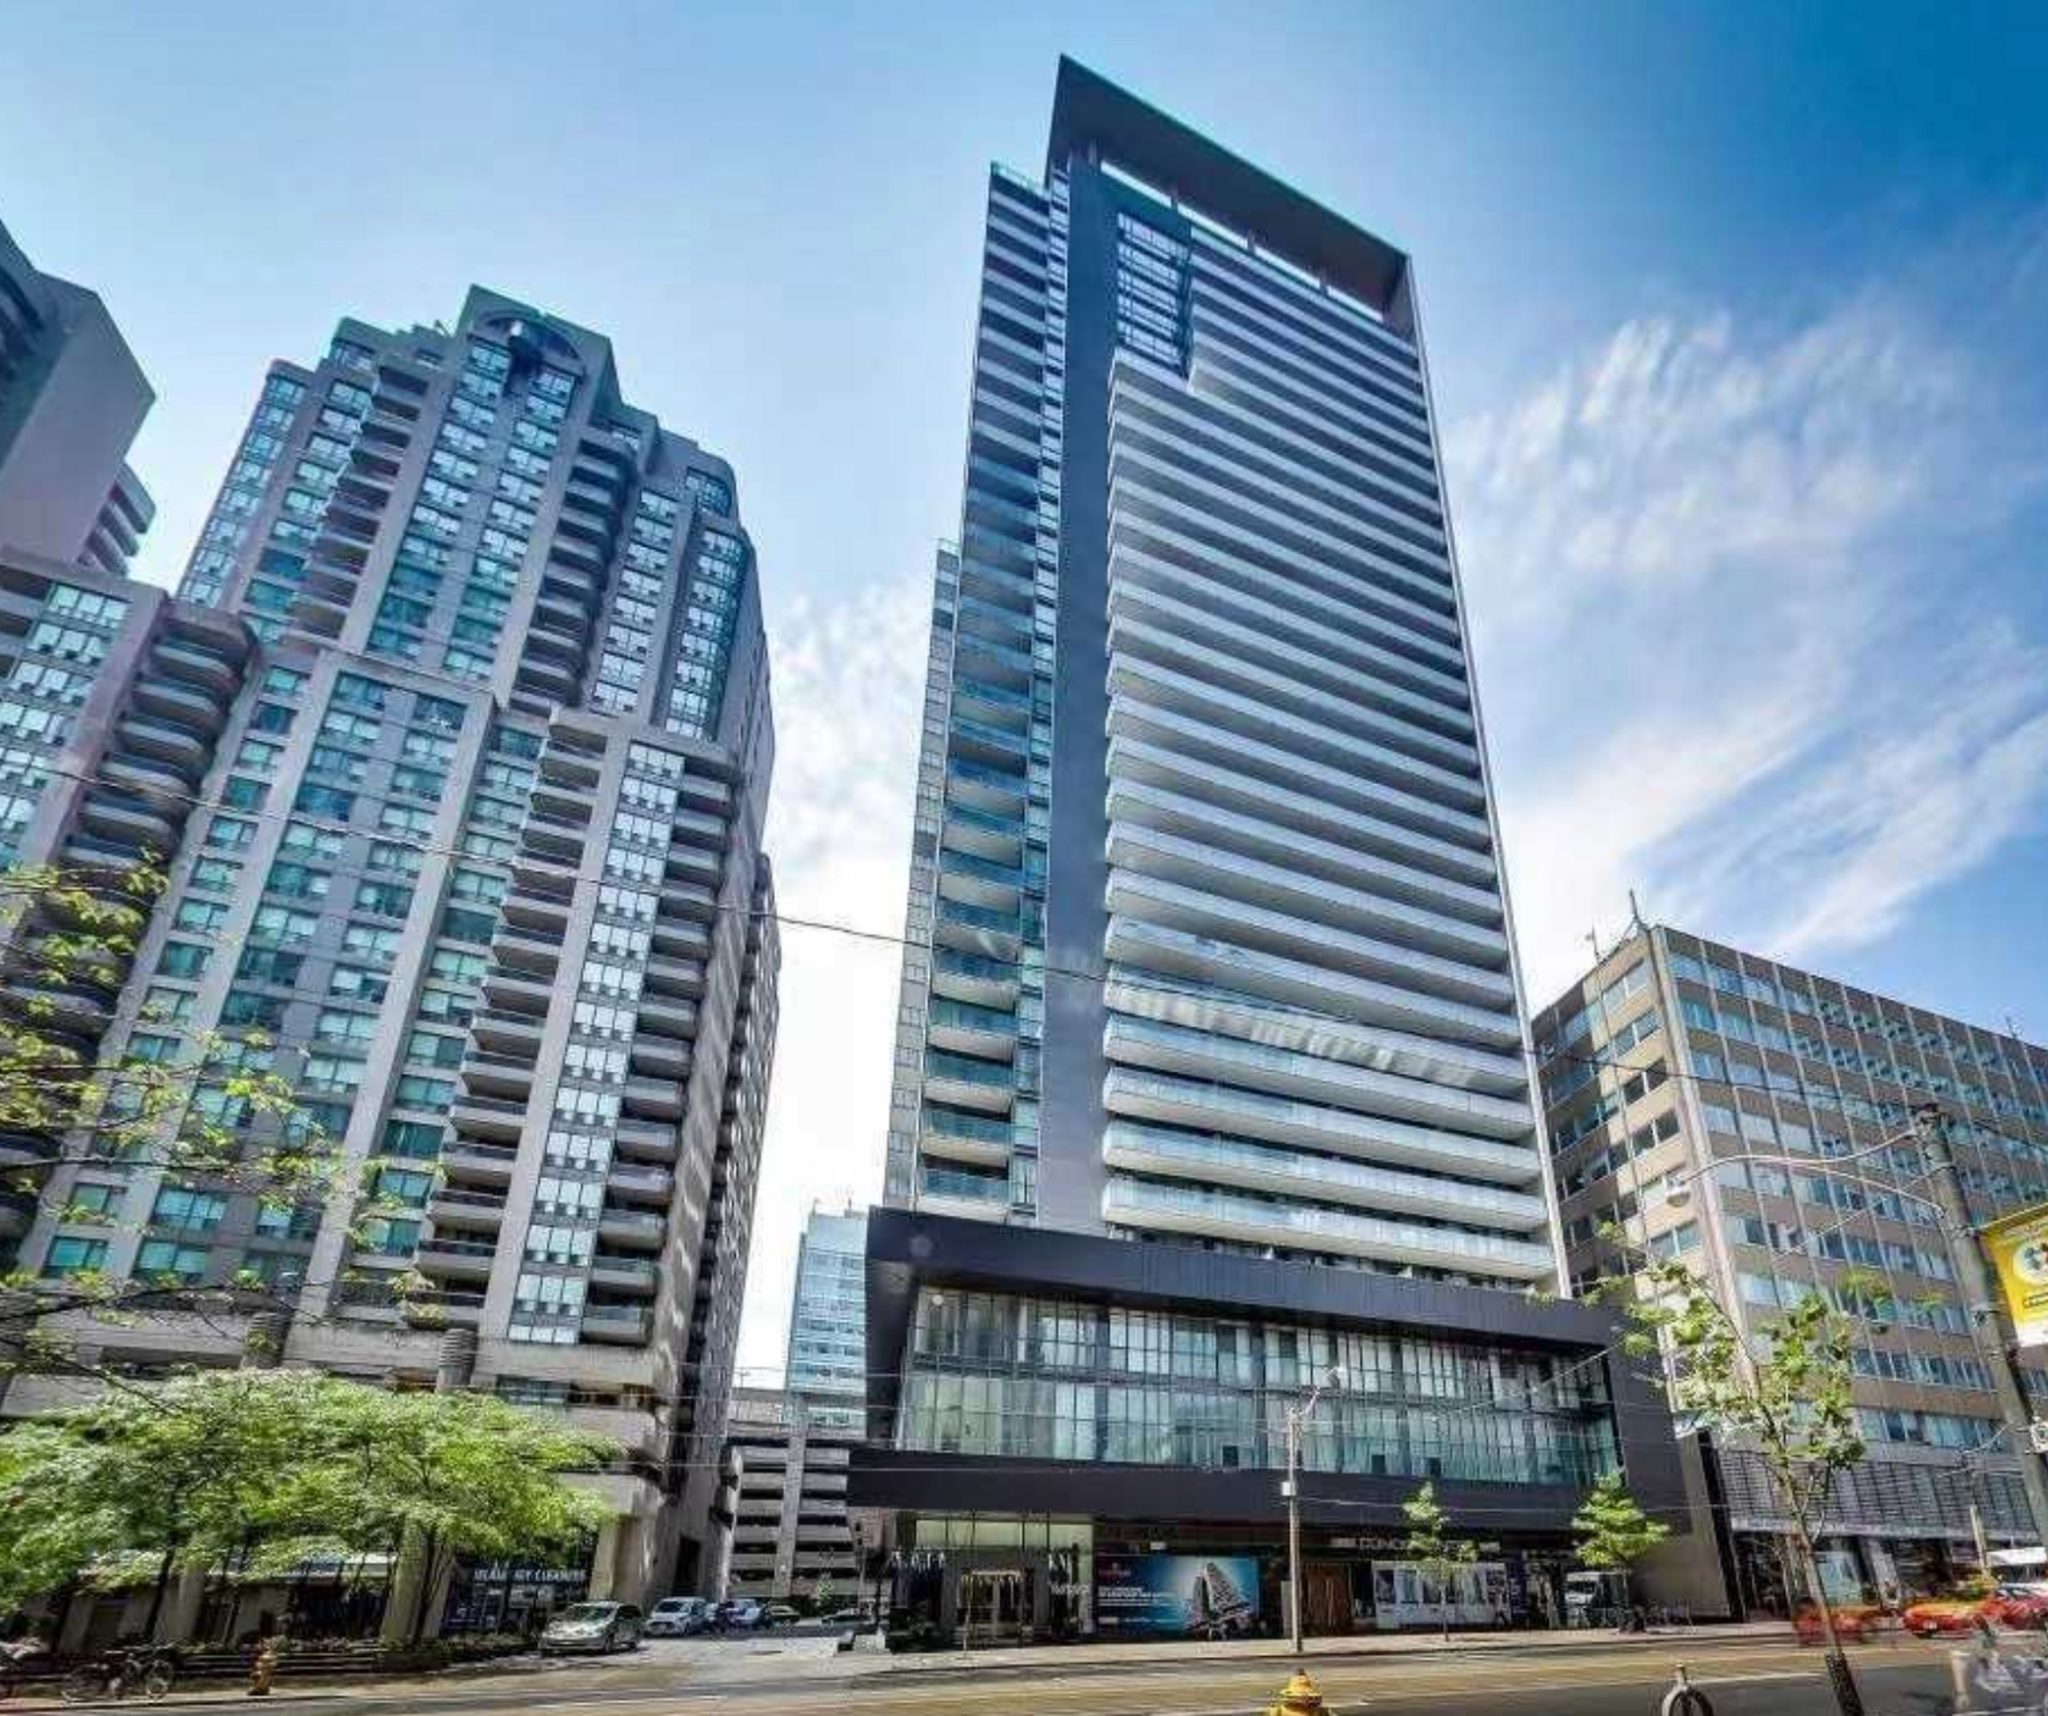 Lumiere Condominiums on Bay. Condo Management Best Practice. Terrawood Property Management. Toronto